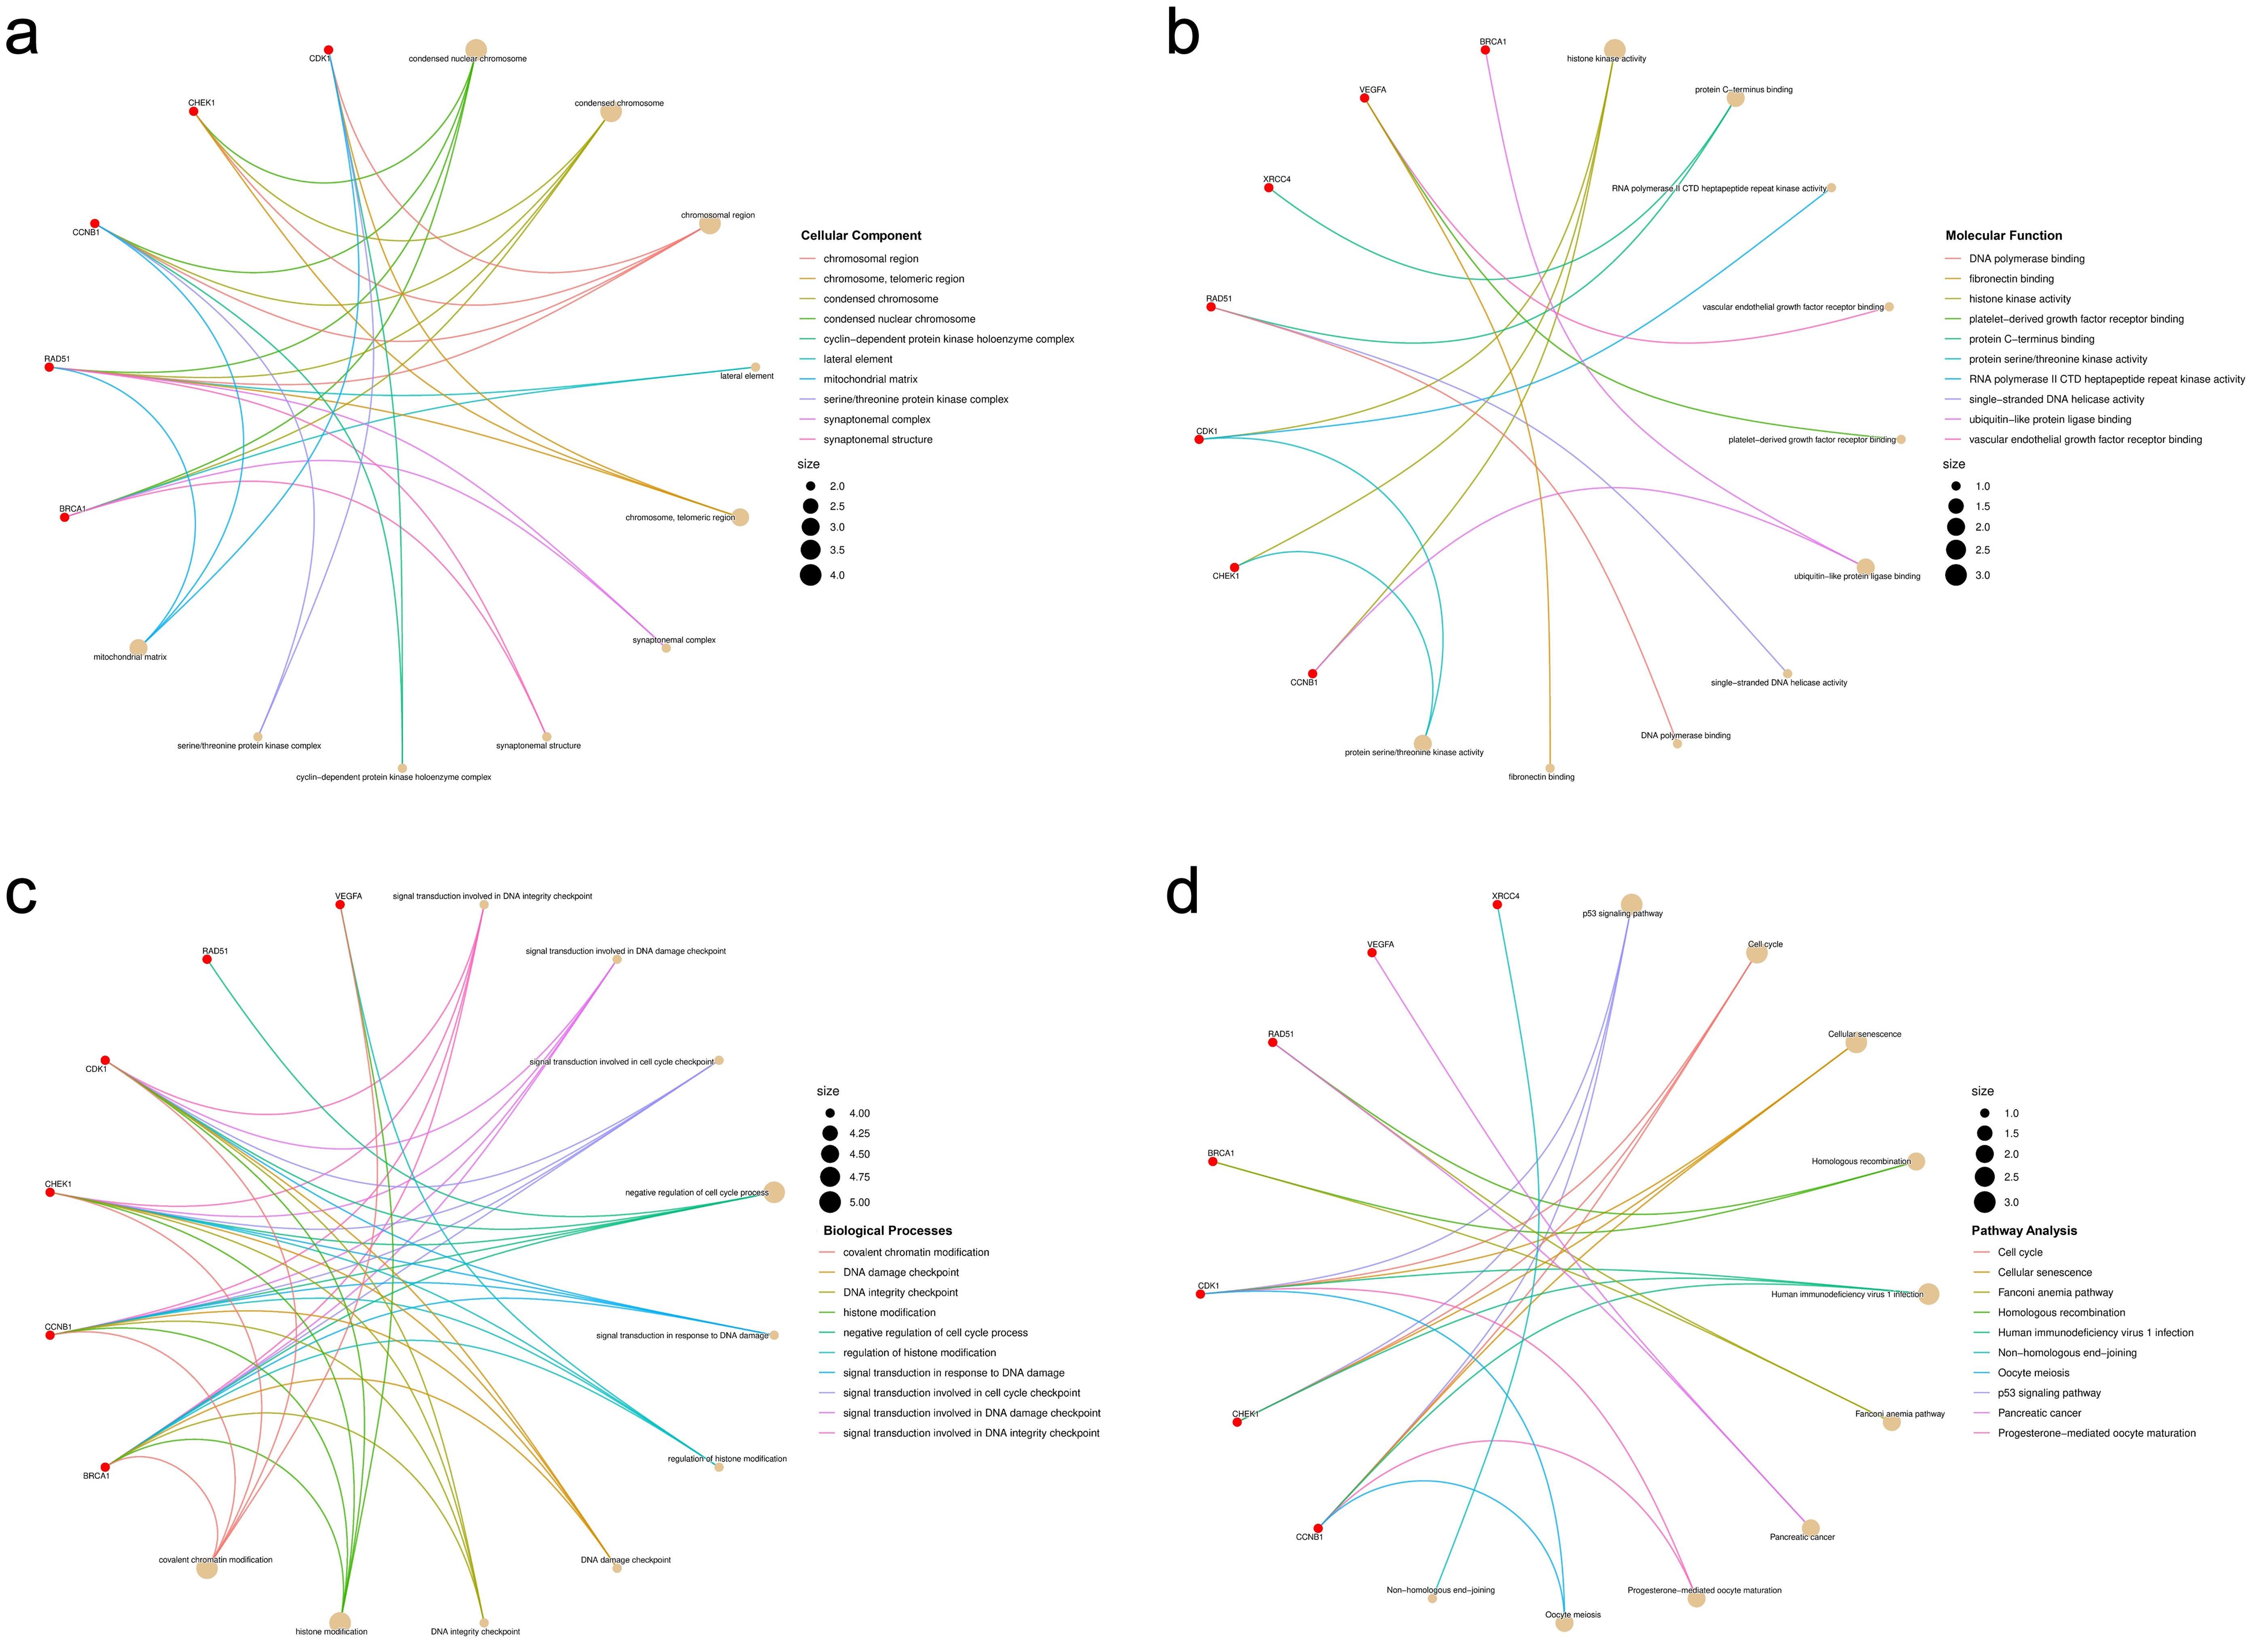 Functional enrichment analysis of selected genes.